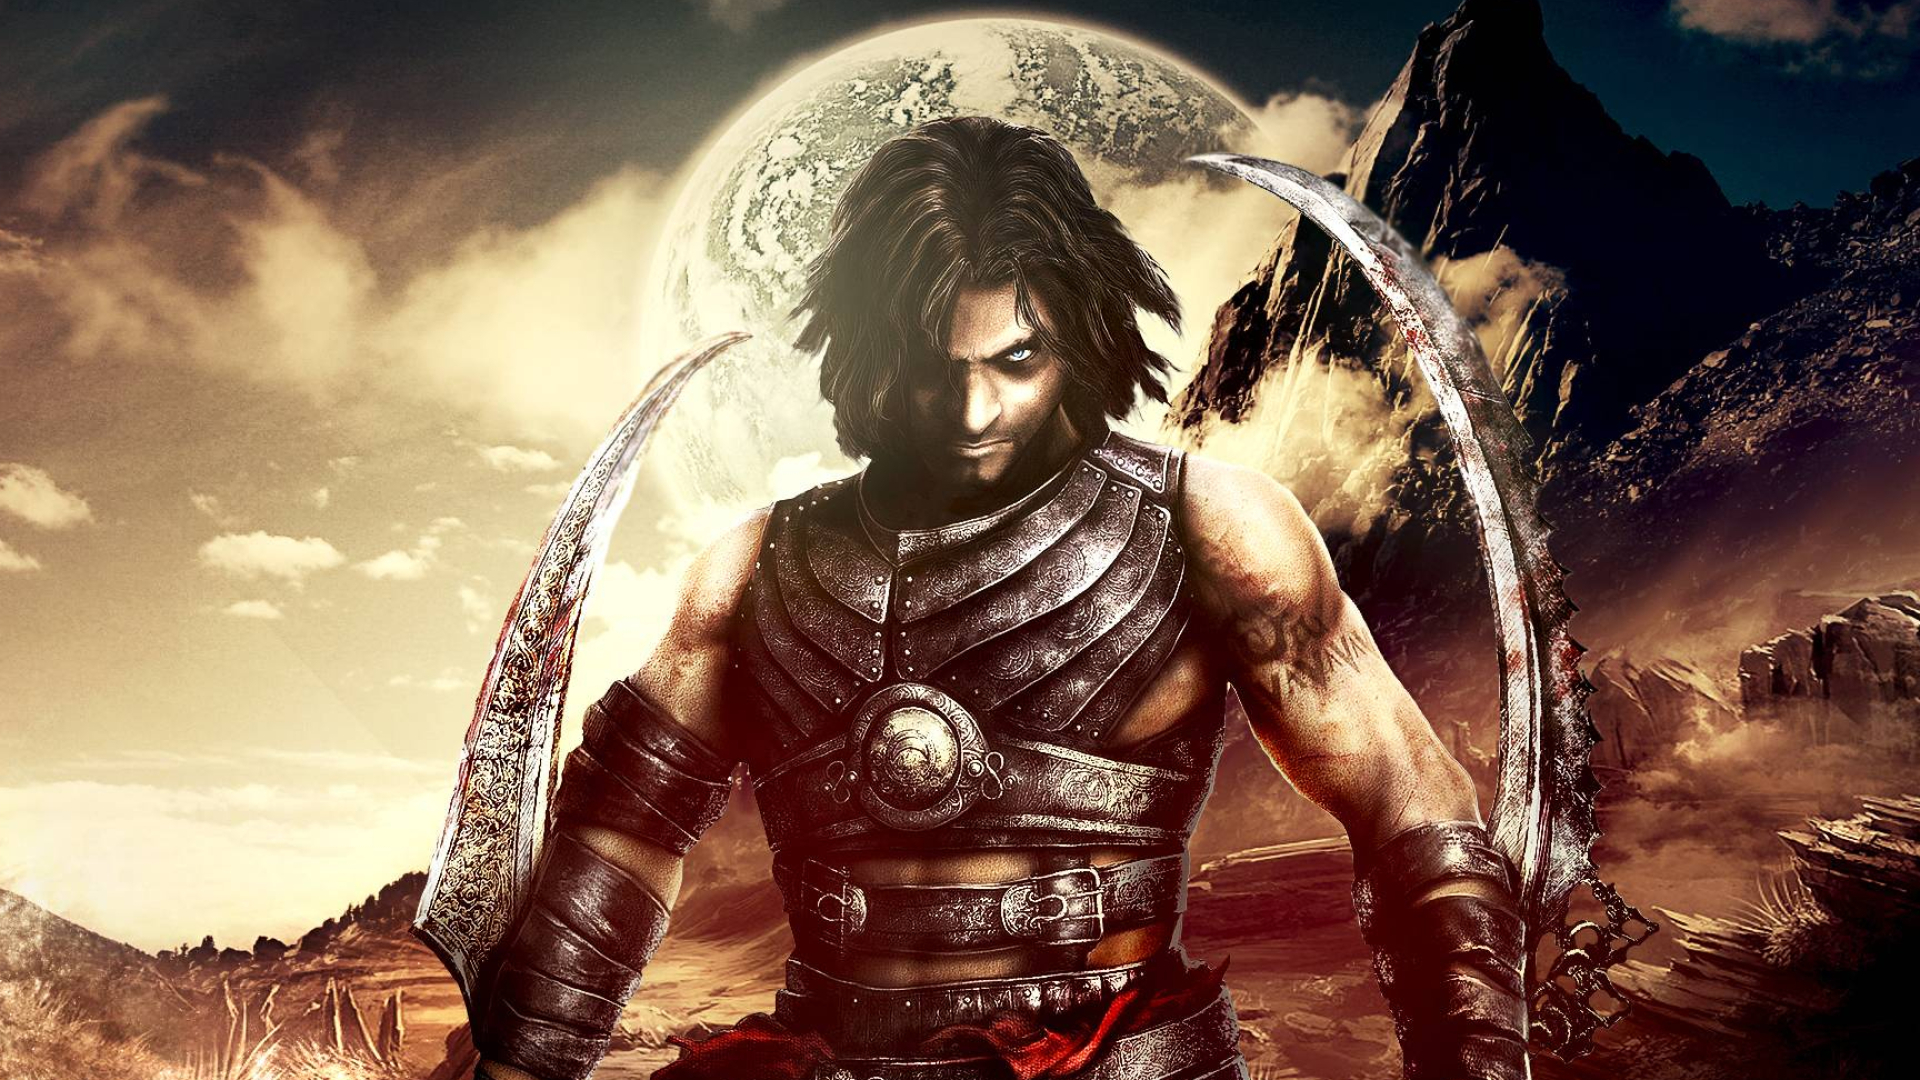 1920x1080 Prince of Persia 2 Wallpapers Top Free Prince of Persia 2 Backgrounds